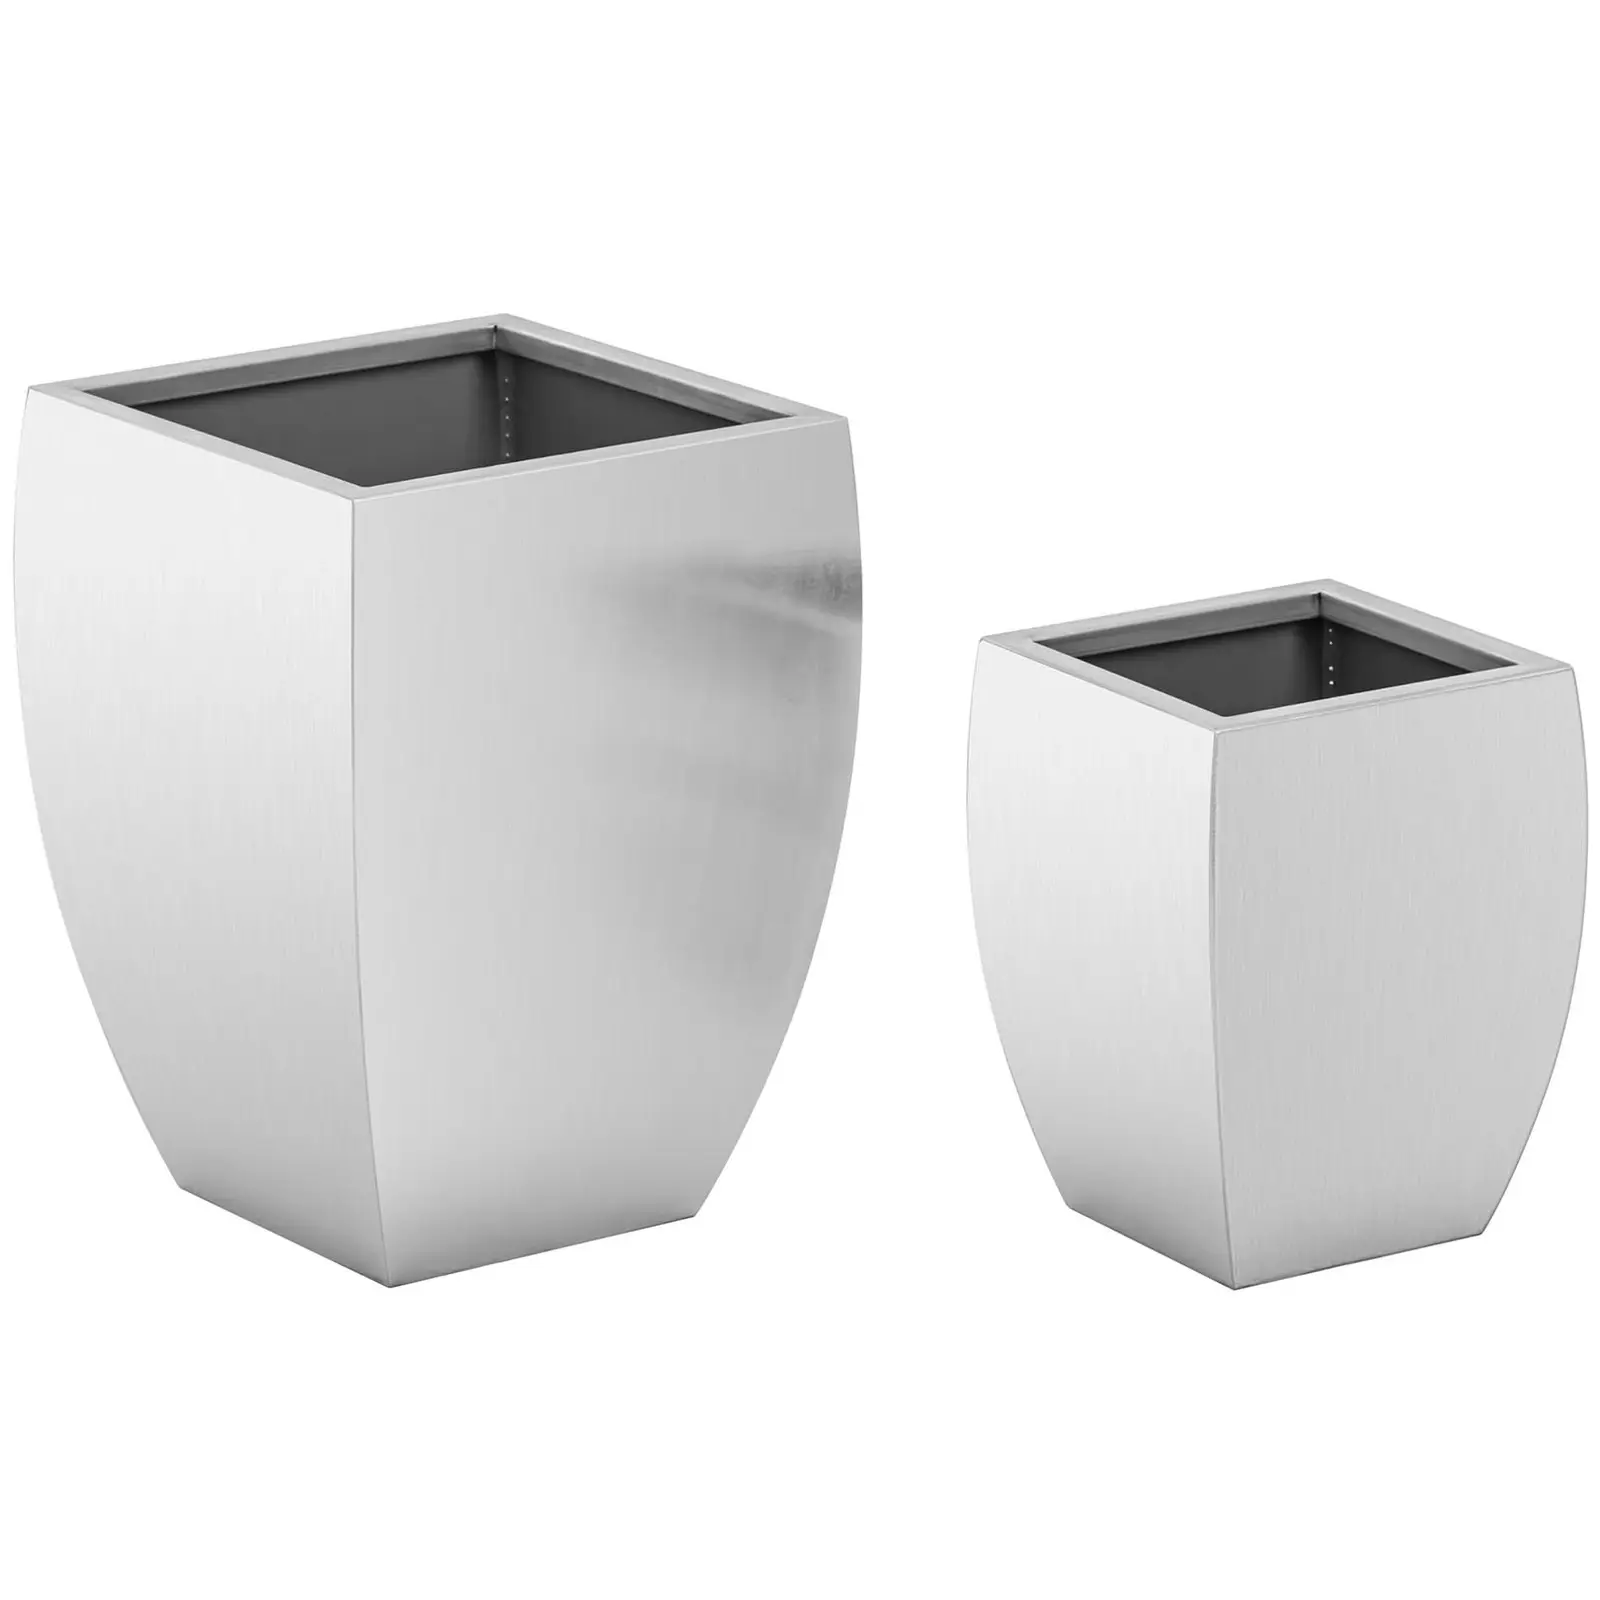 Planter Pot - Set of 2 - Stainless steel - conical / rounded - Royal Catering